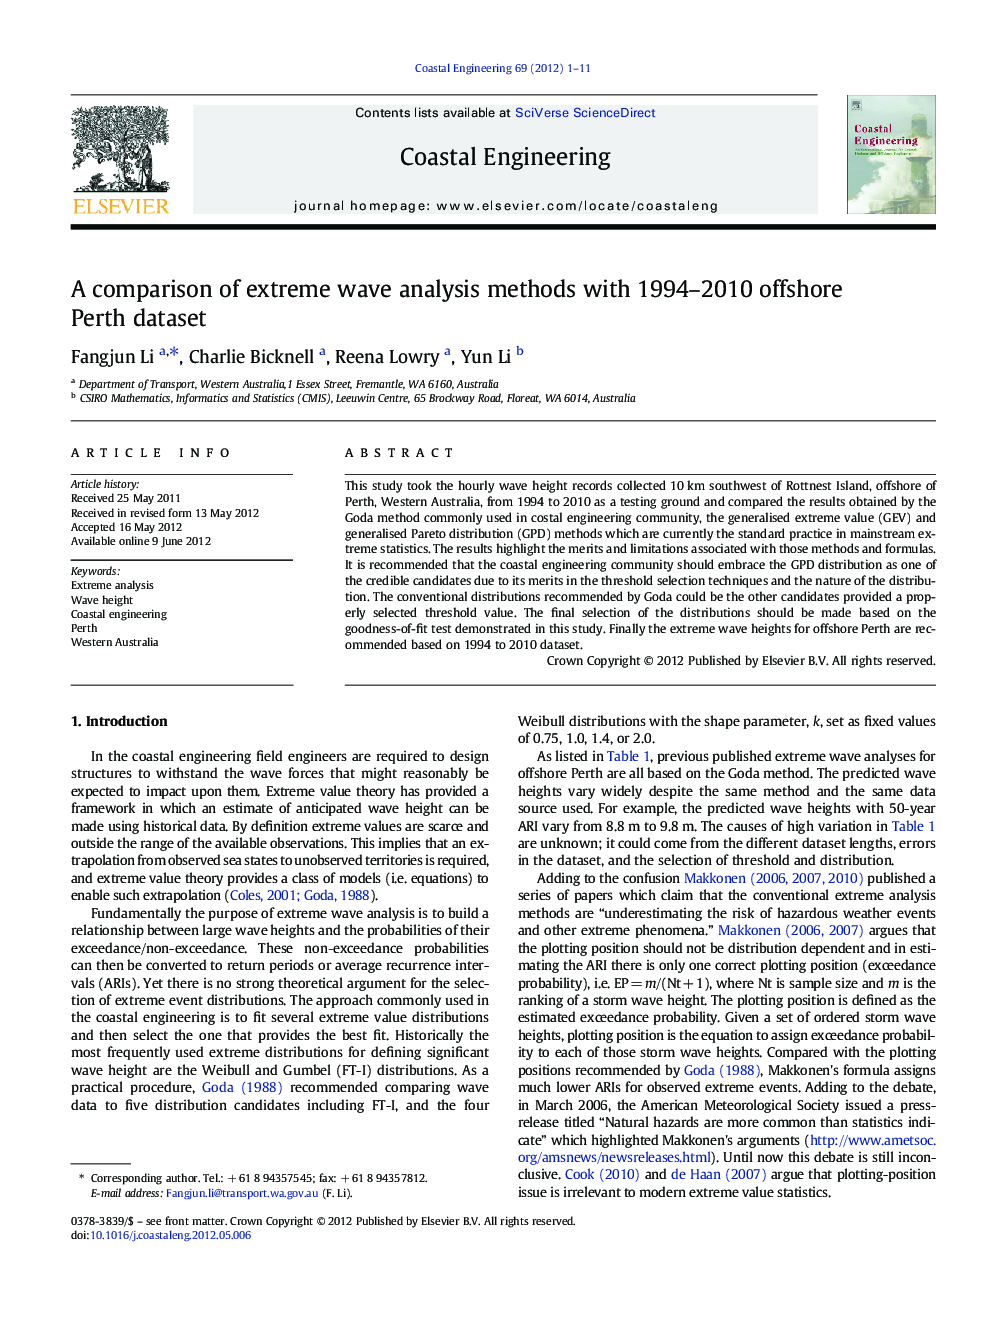 A comparison of extreme wave analysis methods with 1994–2010 offshore Perth dataset